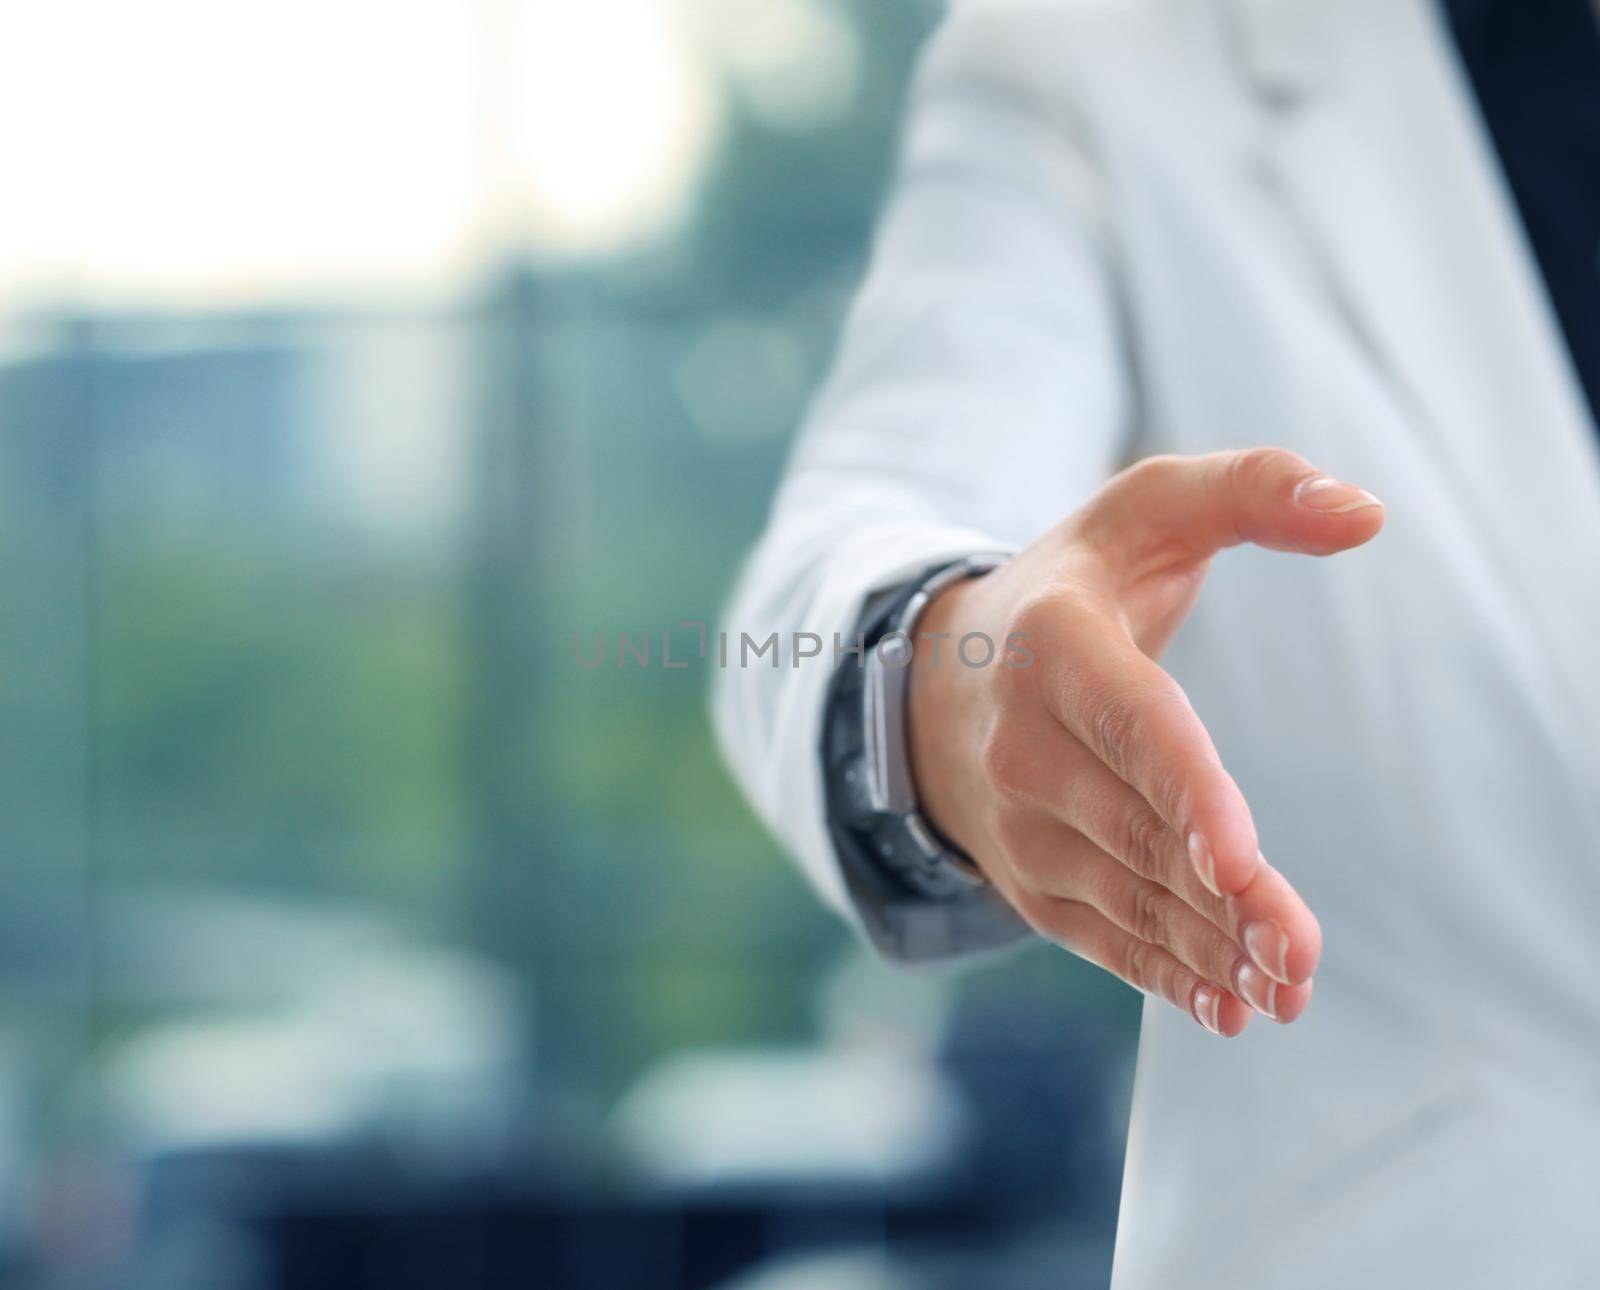 Midsection of a businesswoman with an open hand ready to seal a deal